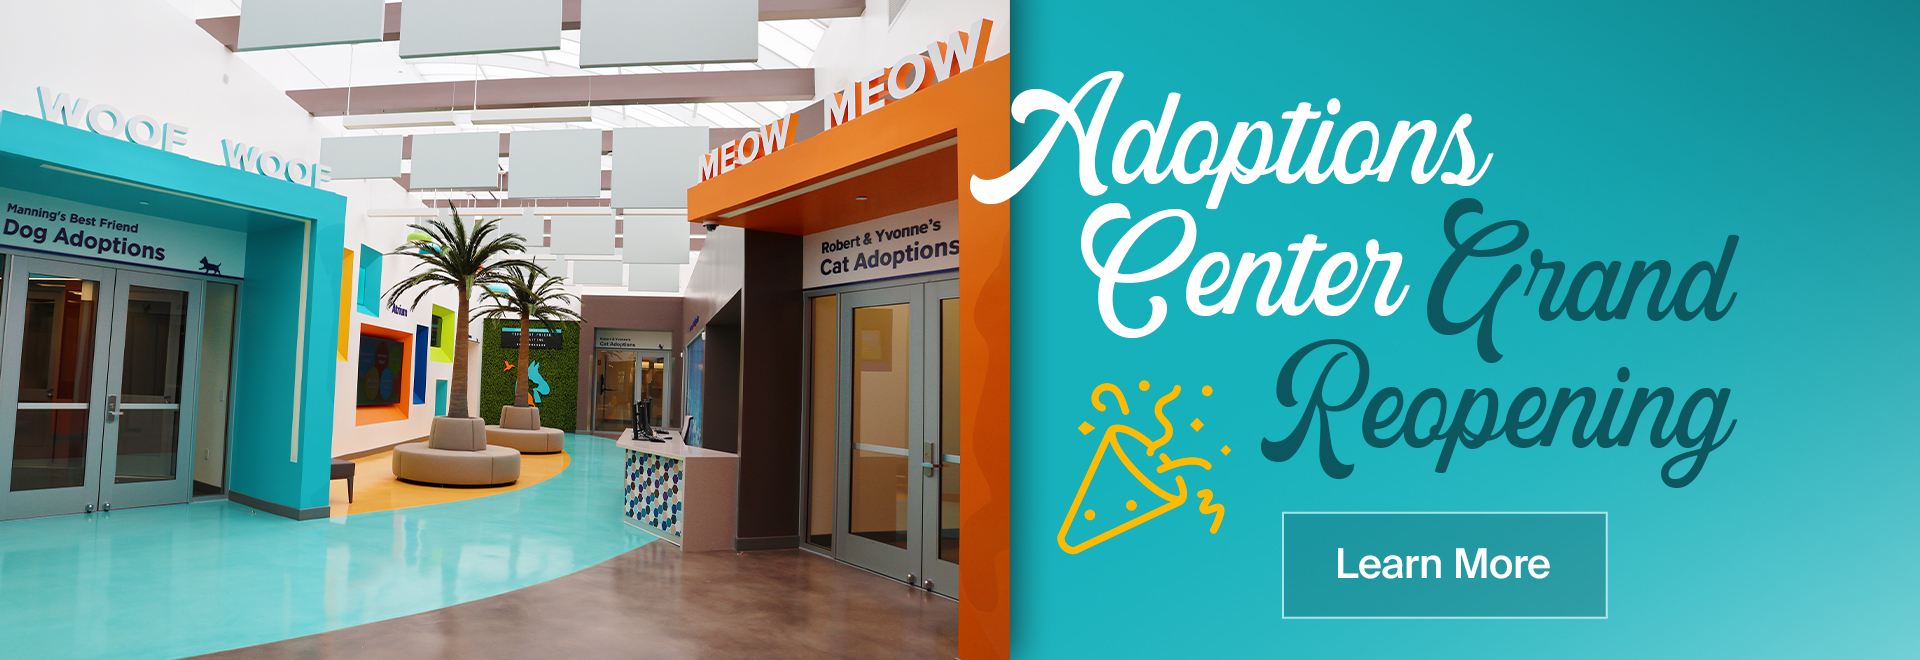 Adoptions Center Grand Reopening. Learn More